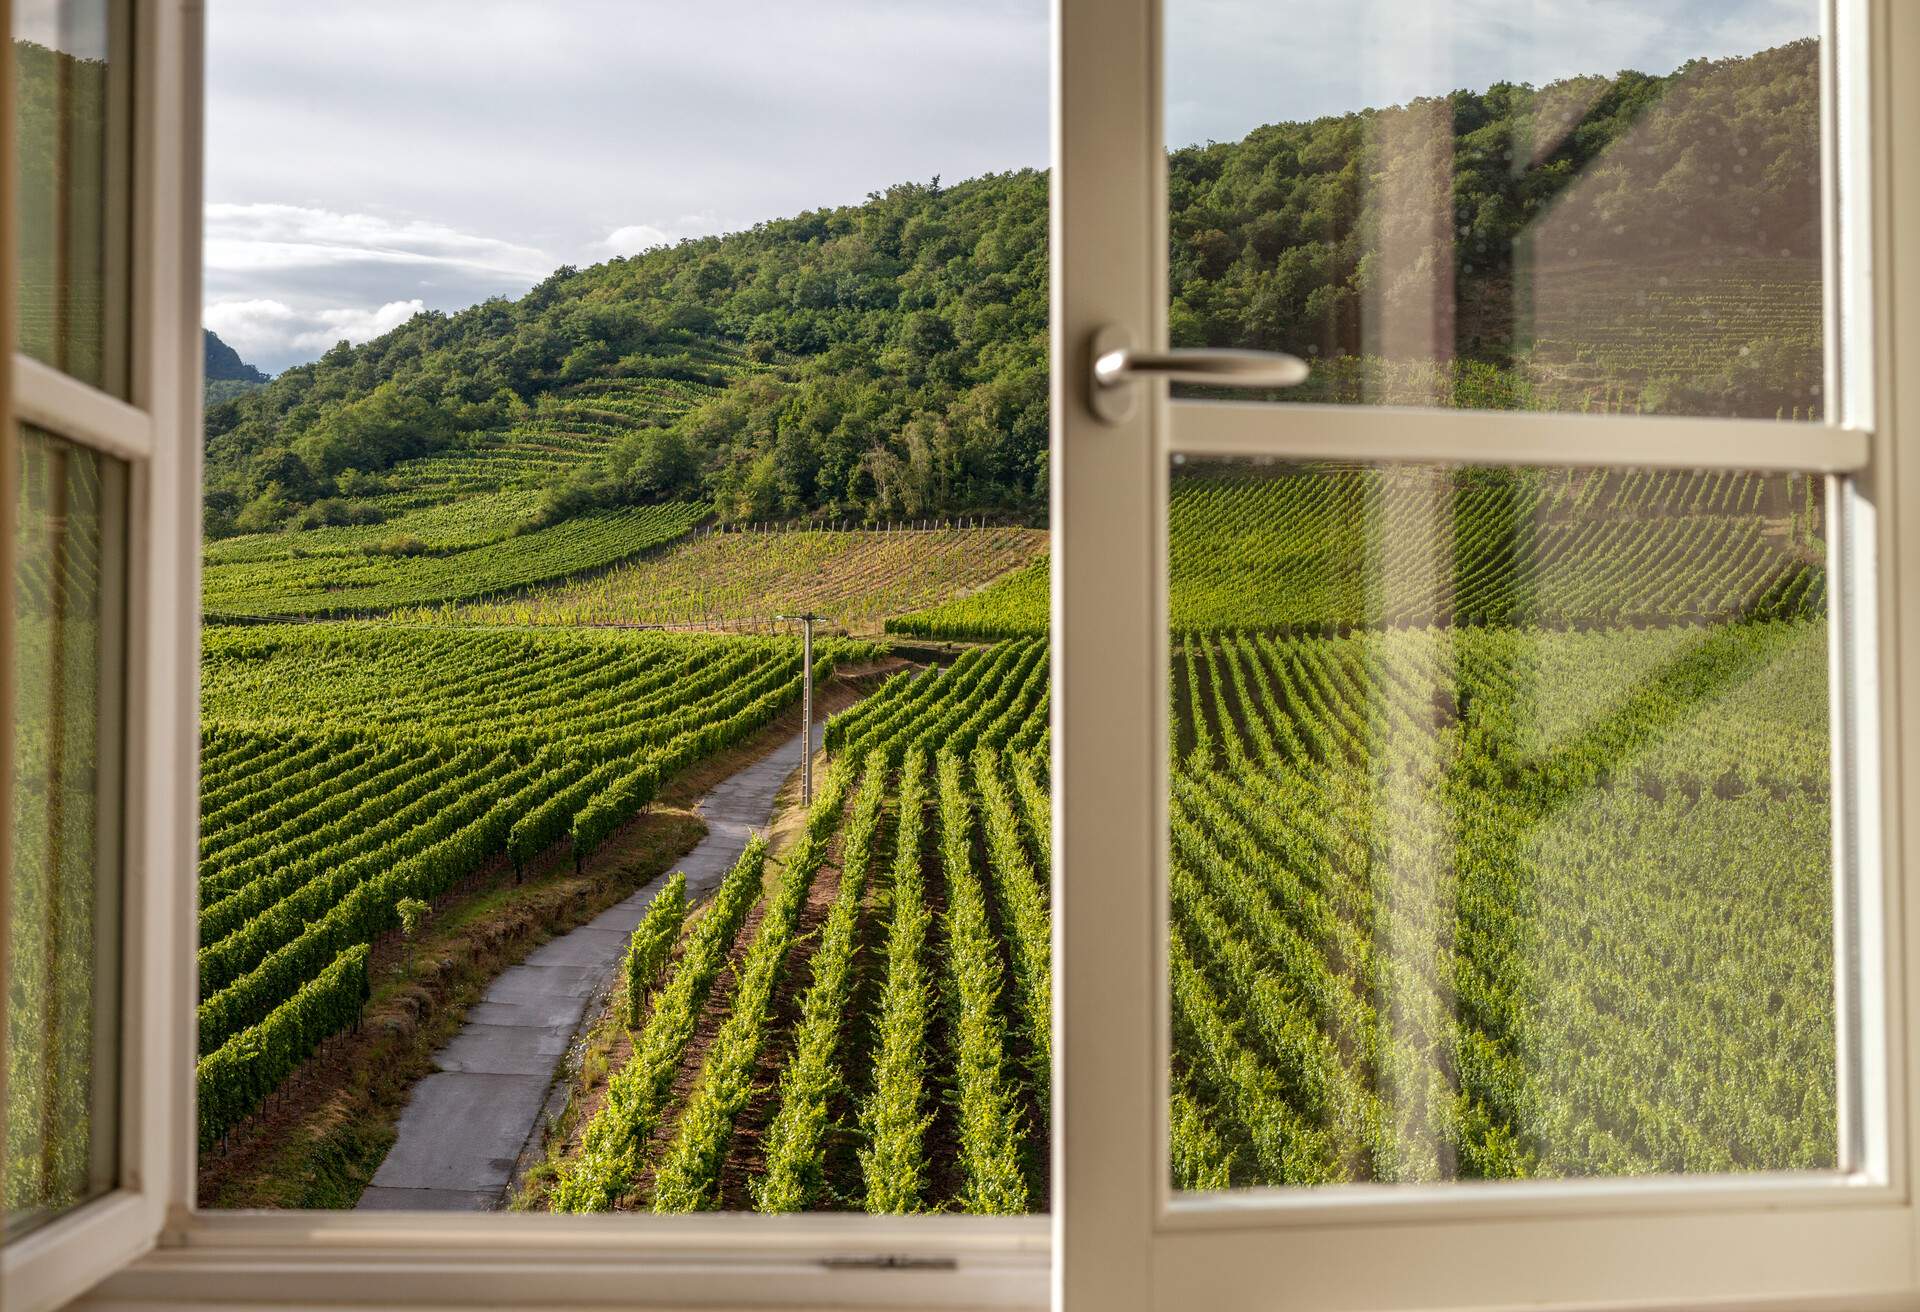 A view through a window on the vineyard